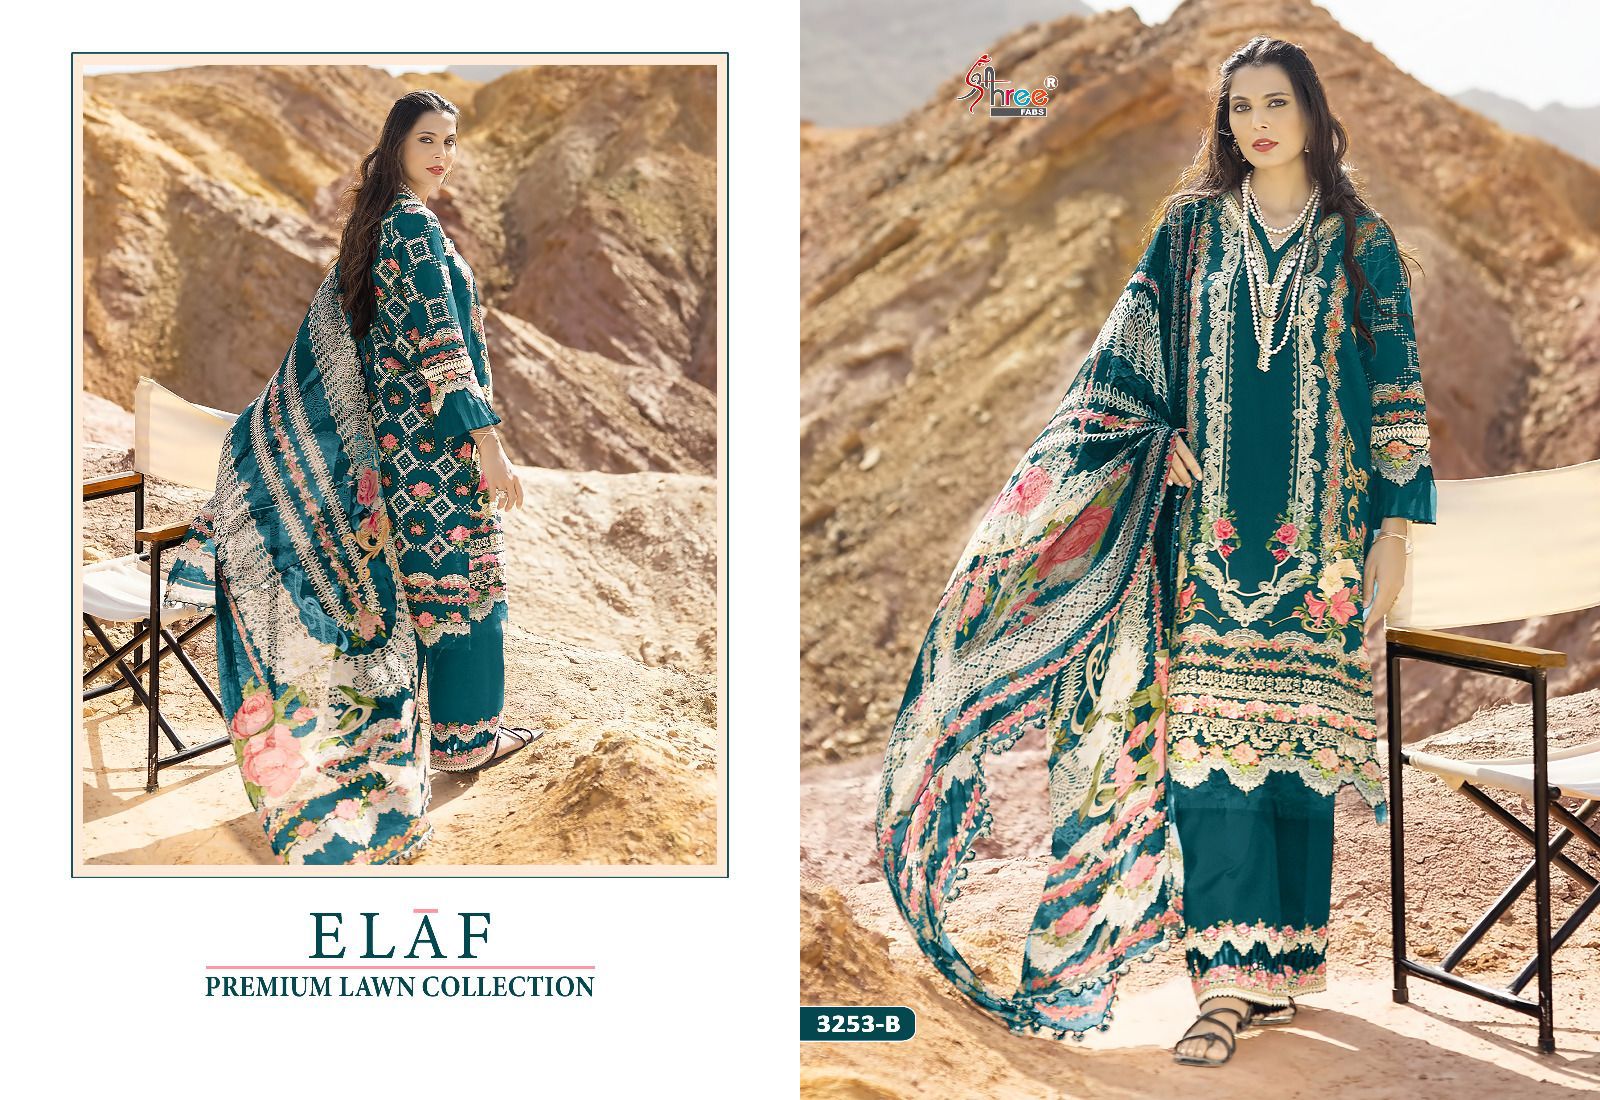 Shree Elaf Premium Lawn Collection collection 3